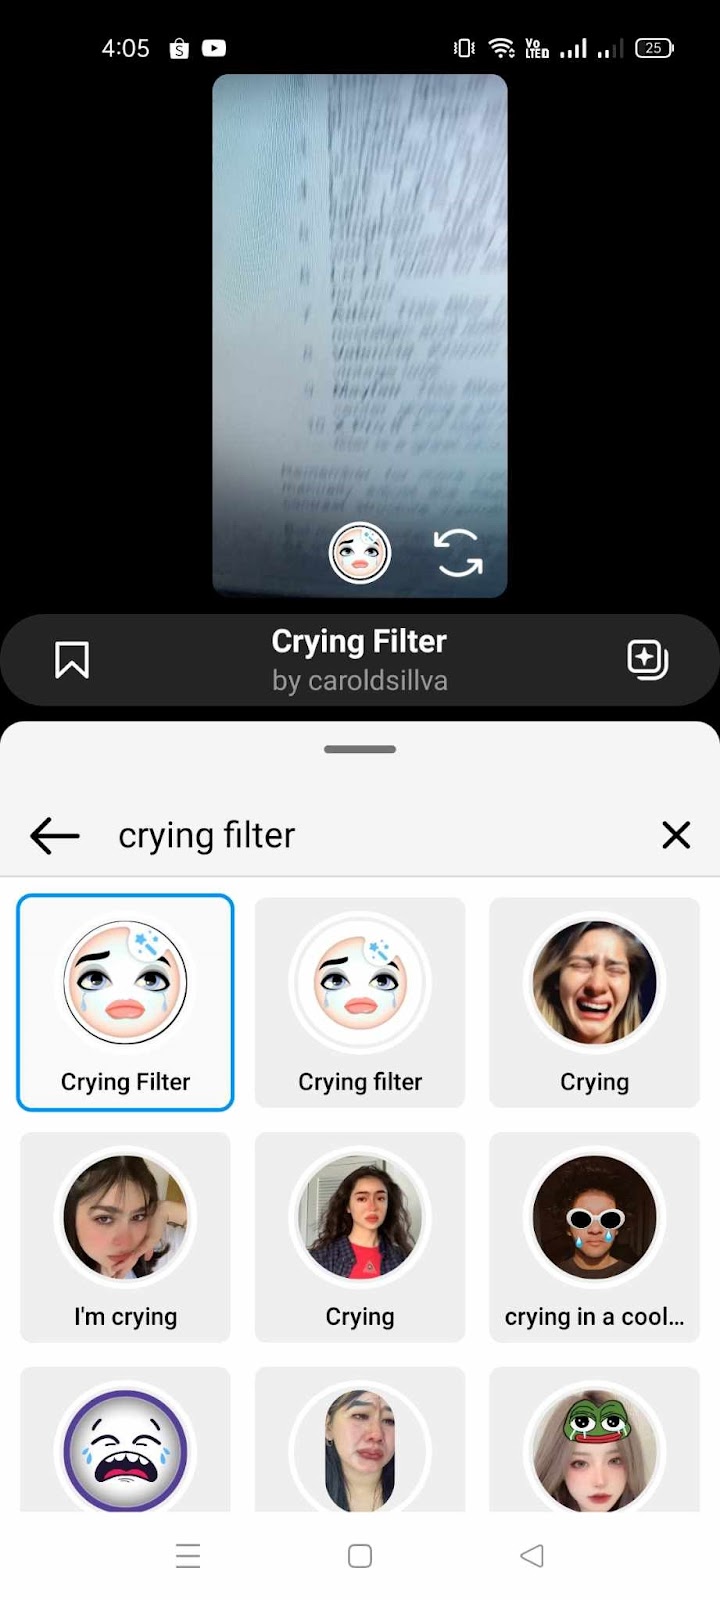 Instagram Crying Filter - Choose Crying Filter